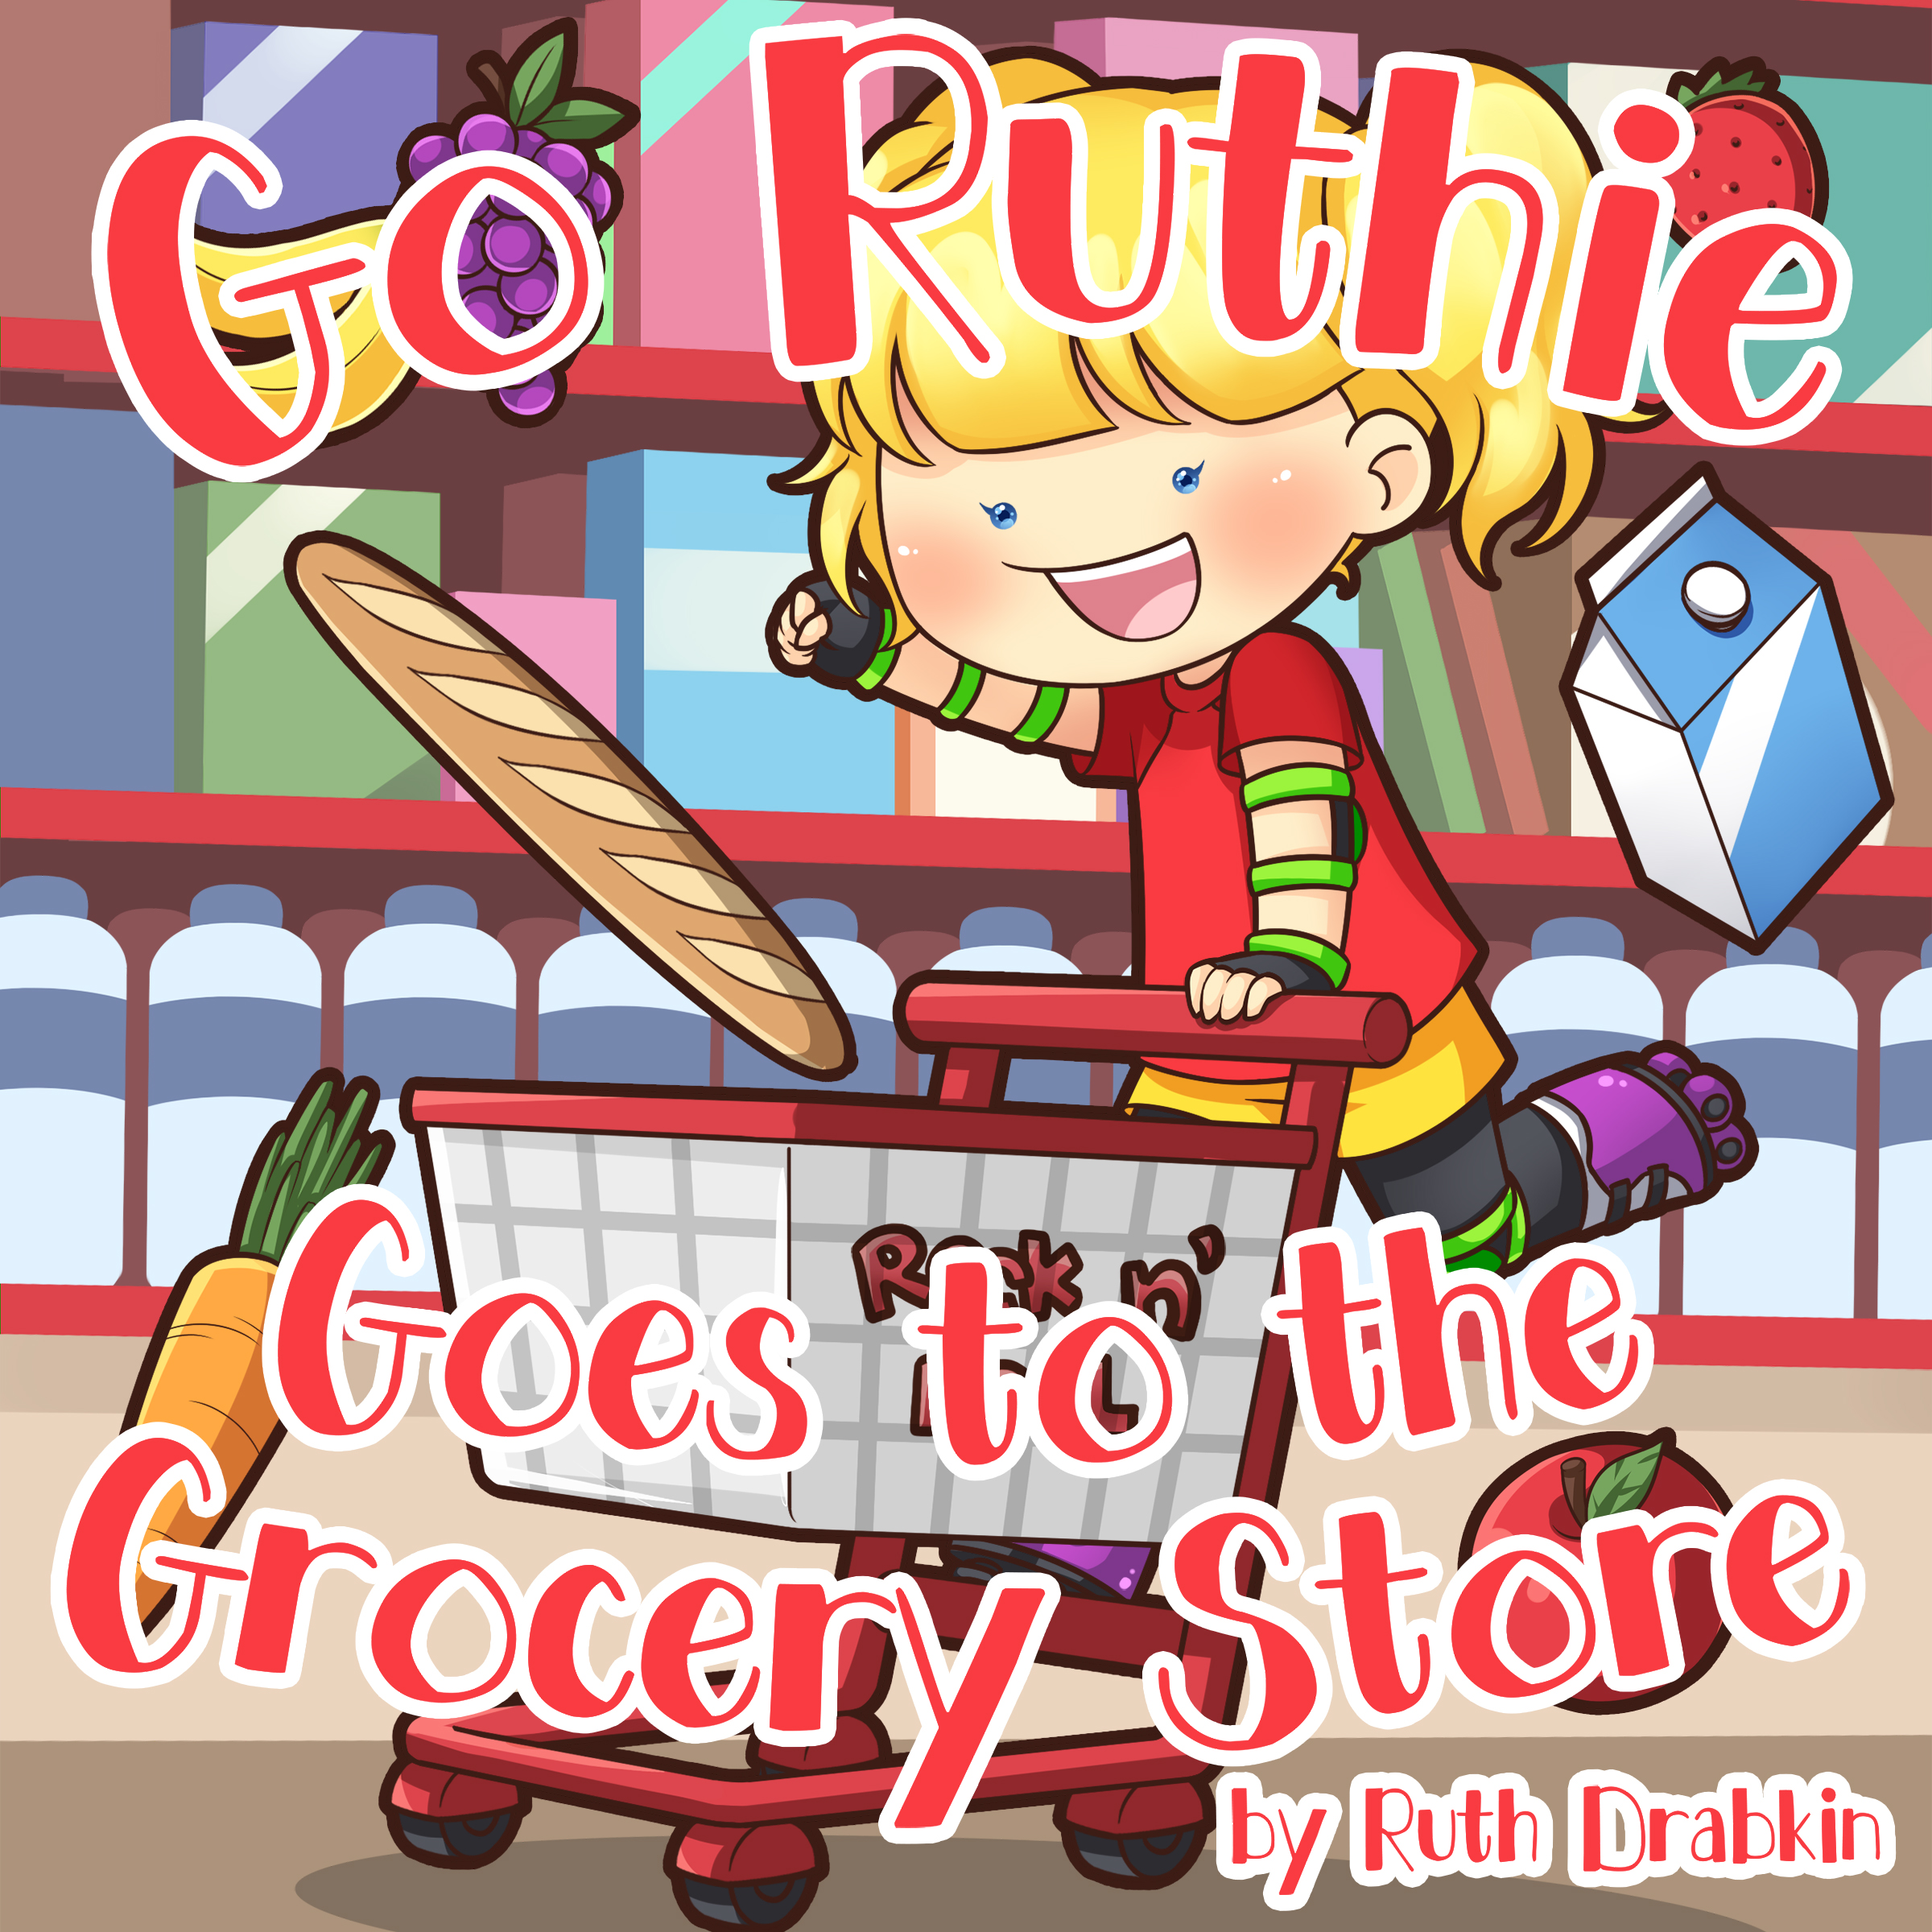 Ruth Drabkin Releases Debut Children's Book: "Go Ruthie Goes to the Grocery Store"